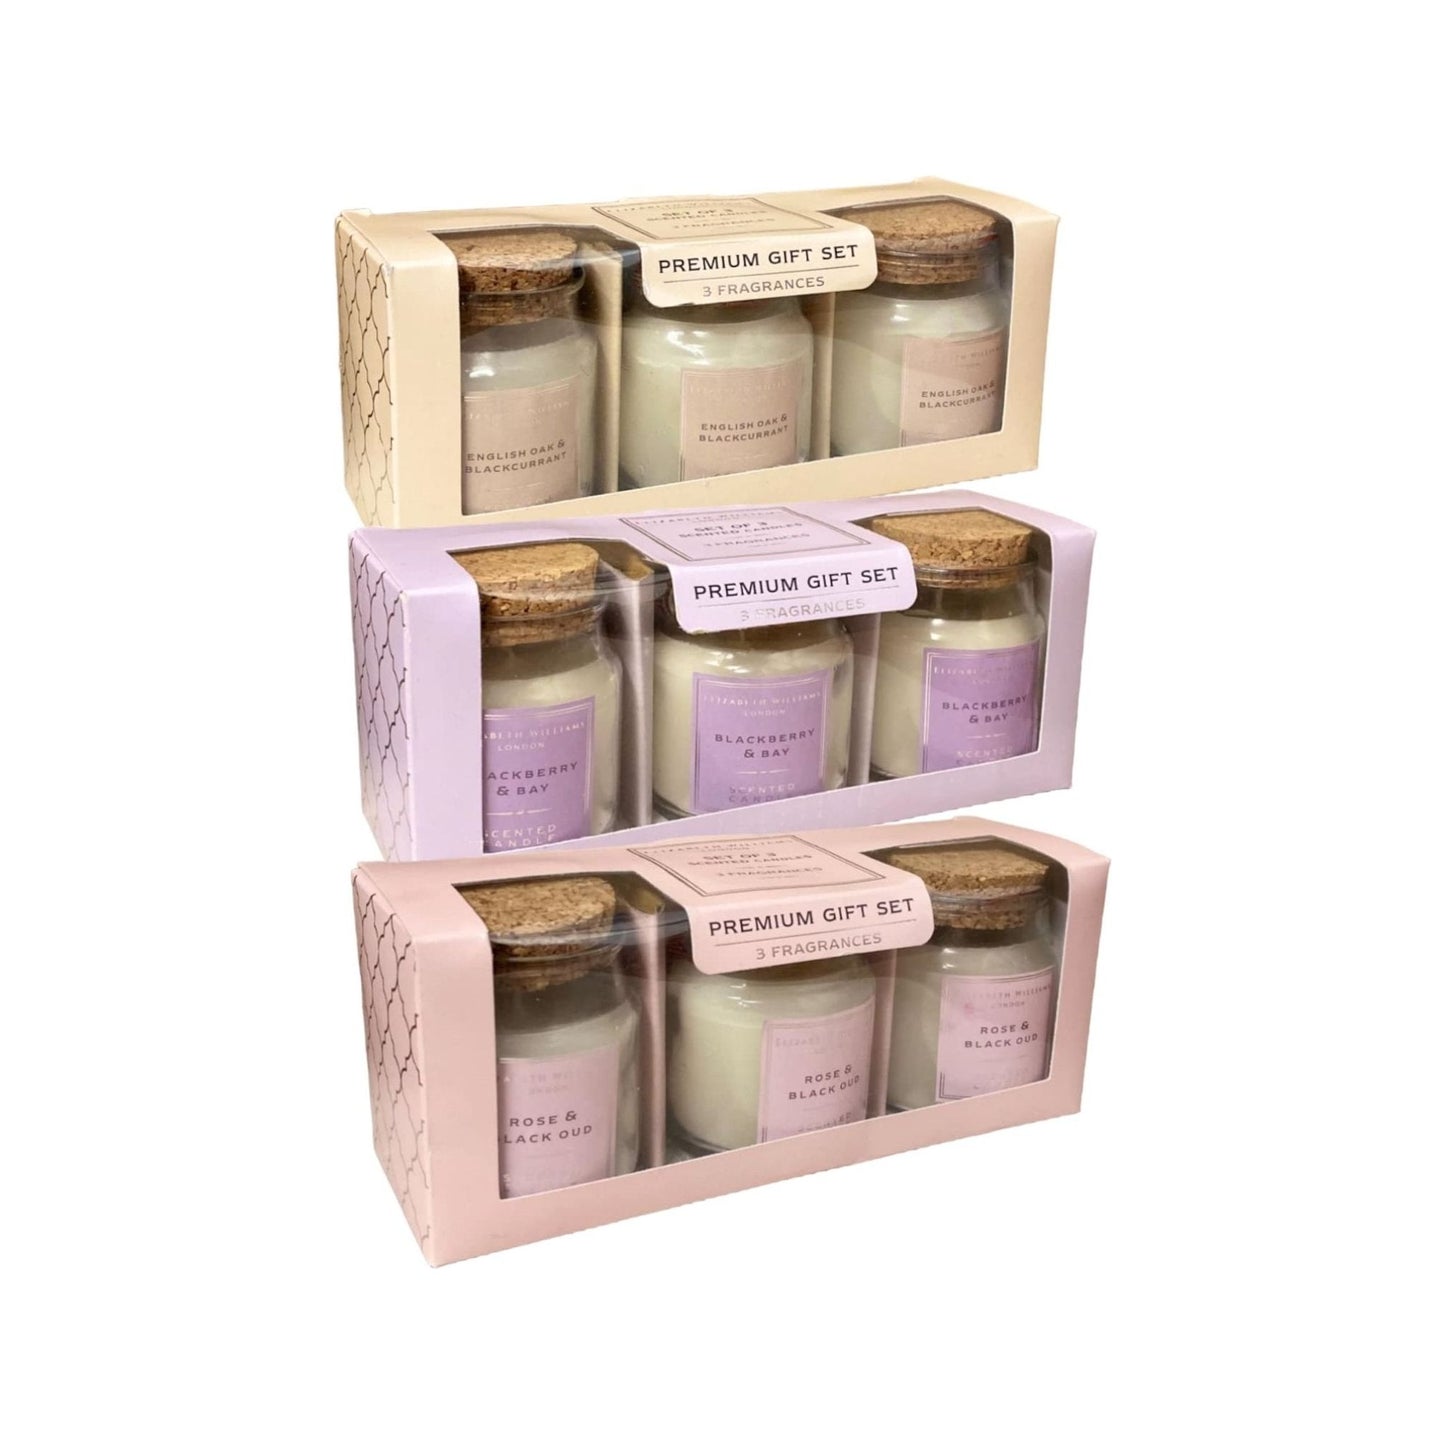 Six Sets of Trio Candle Gift Box - Ashton and Finch